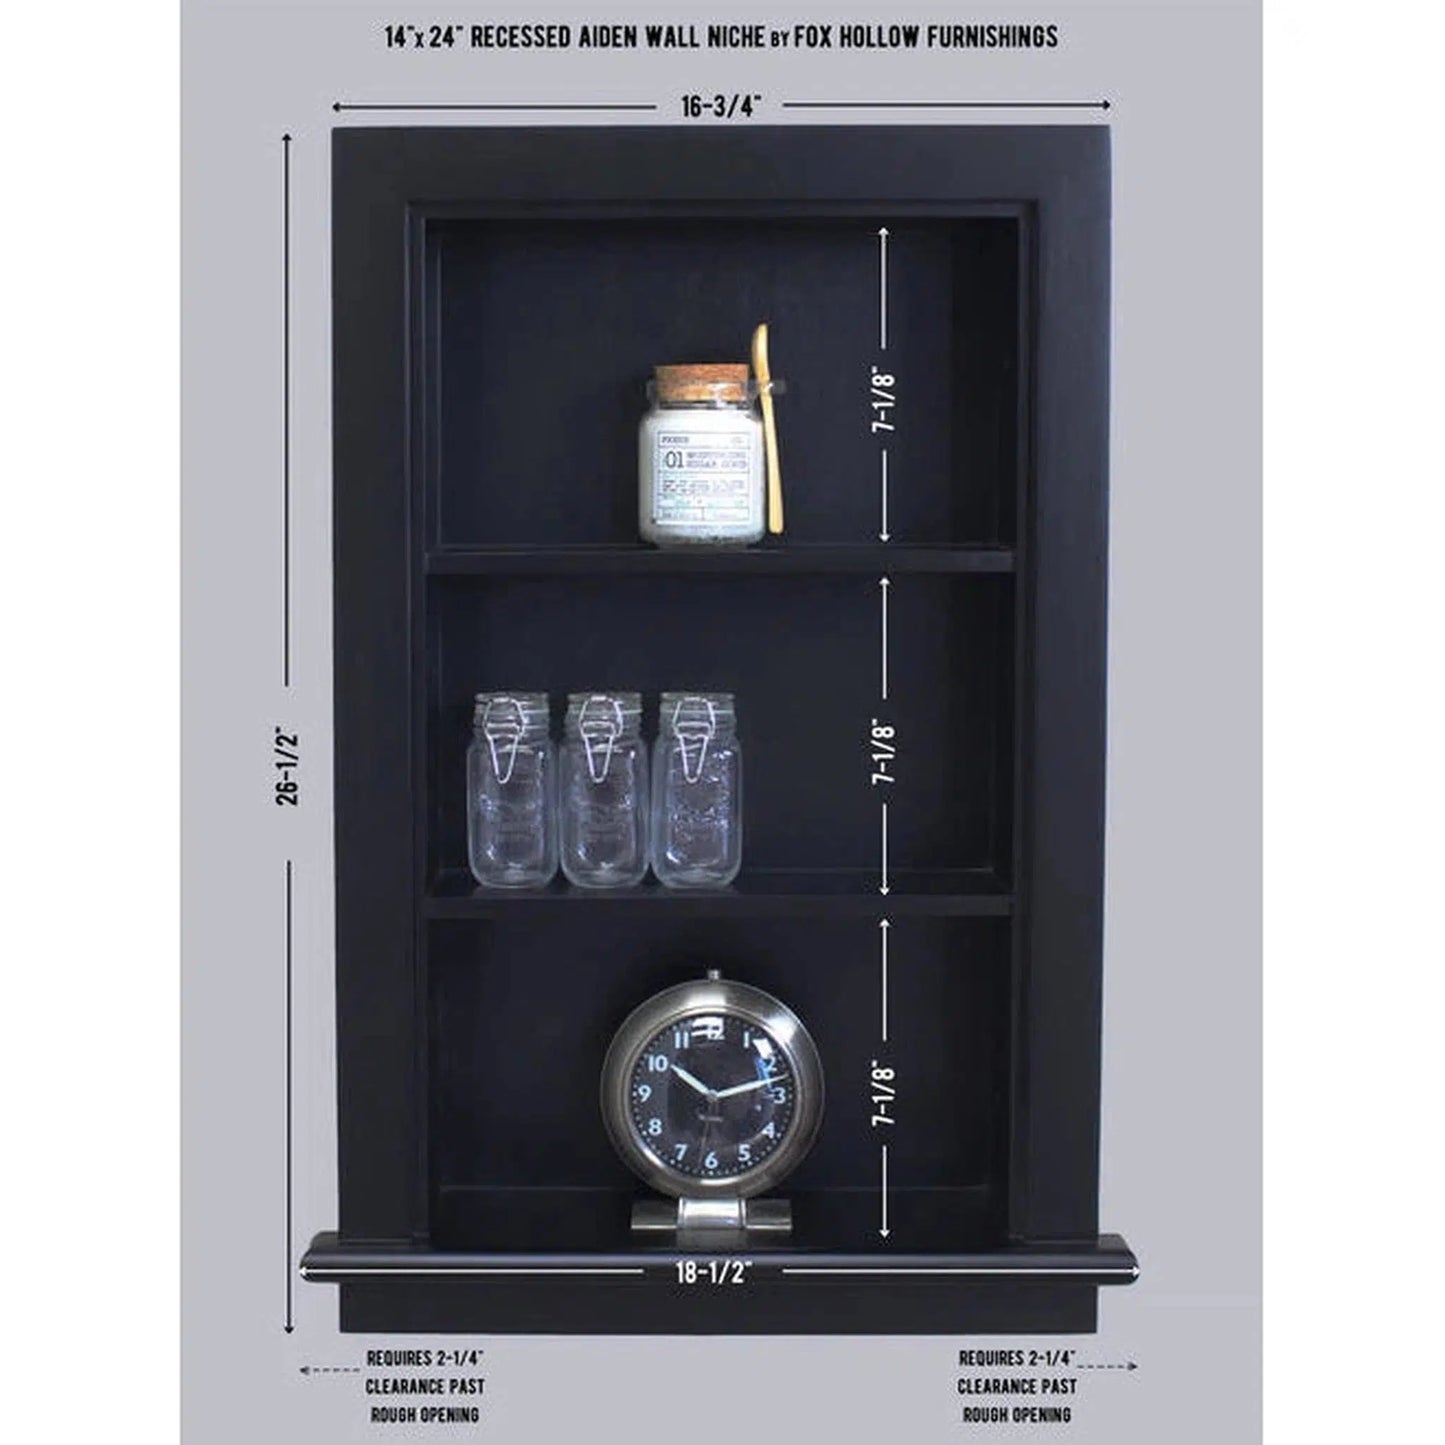 Fox Hollow Furnishings Aiden 14" x 24" Black Recessed Wall Niche With Plain Back